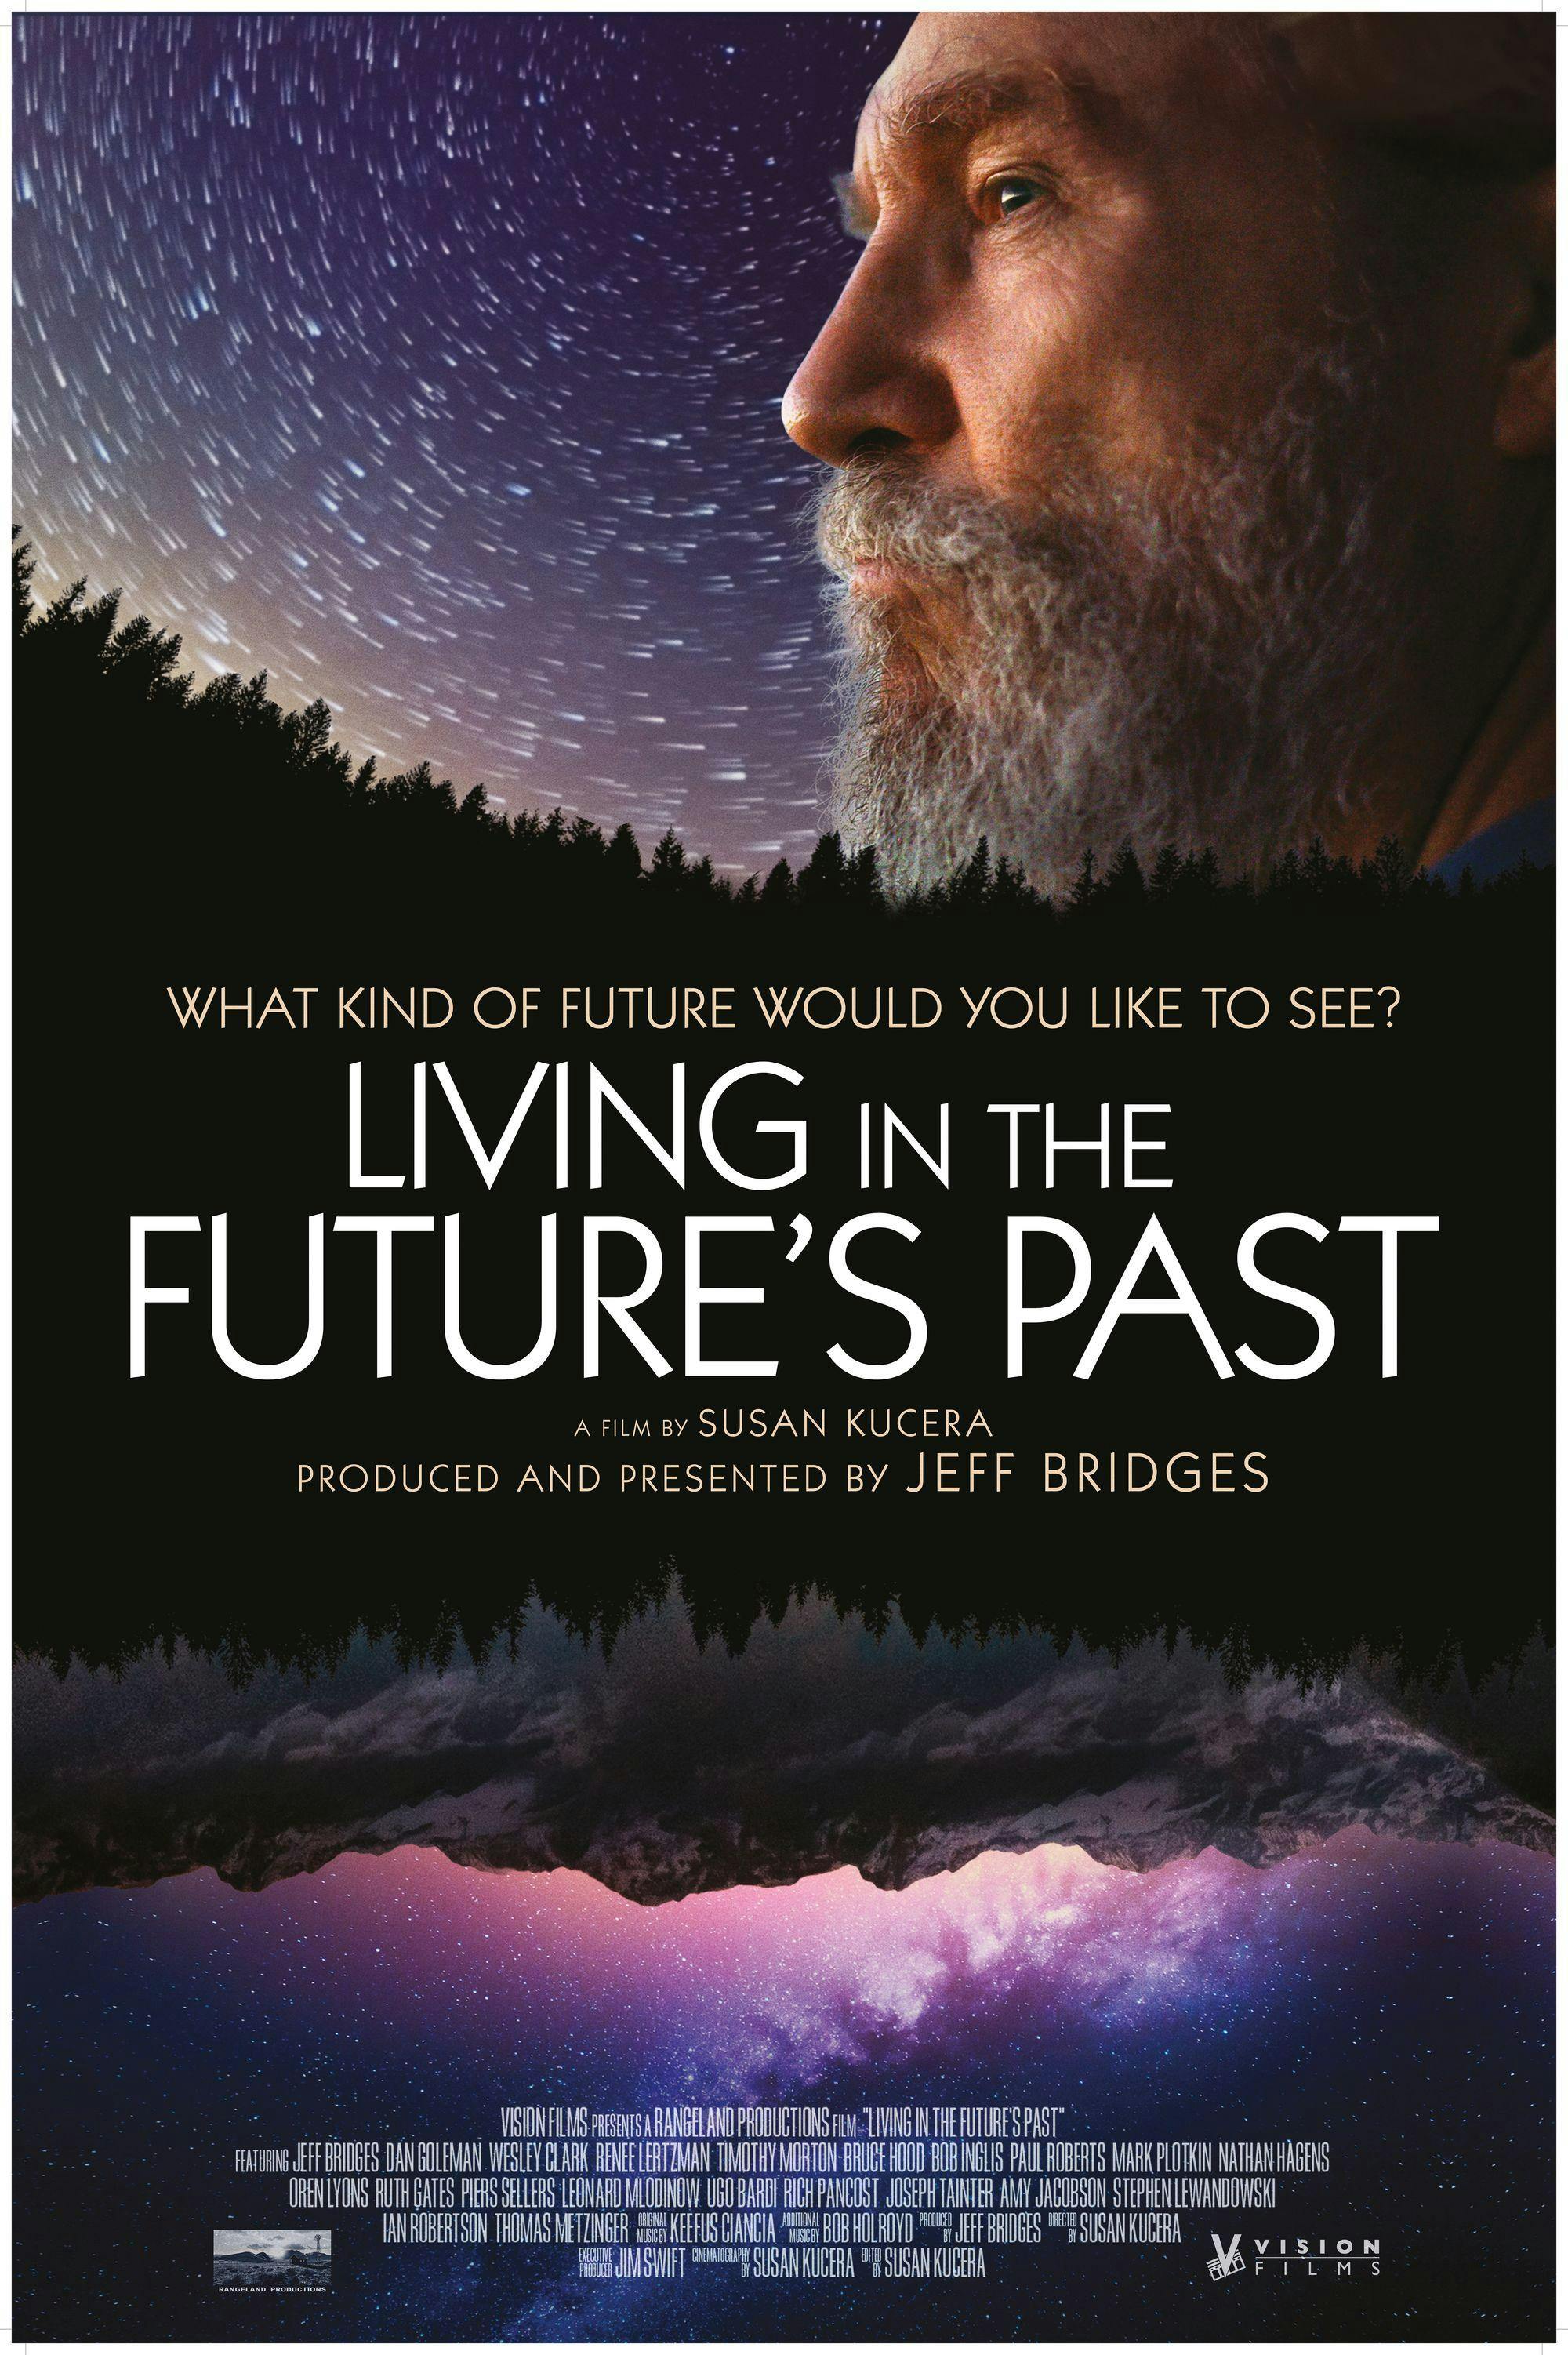 Screening of Jeff Bridges Living in the Future's Past directed by Susan Kucera